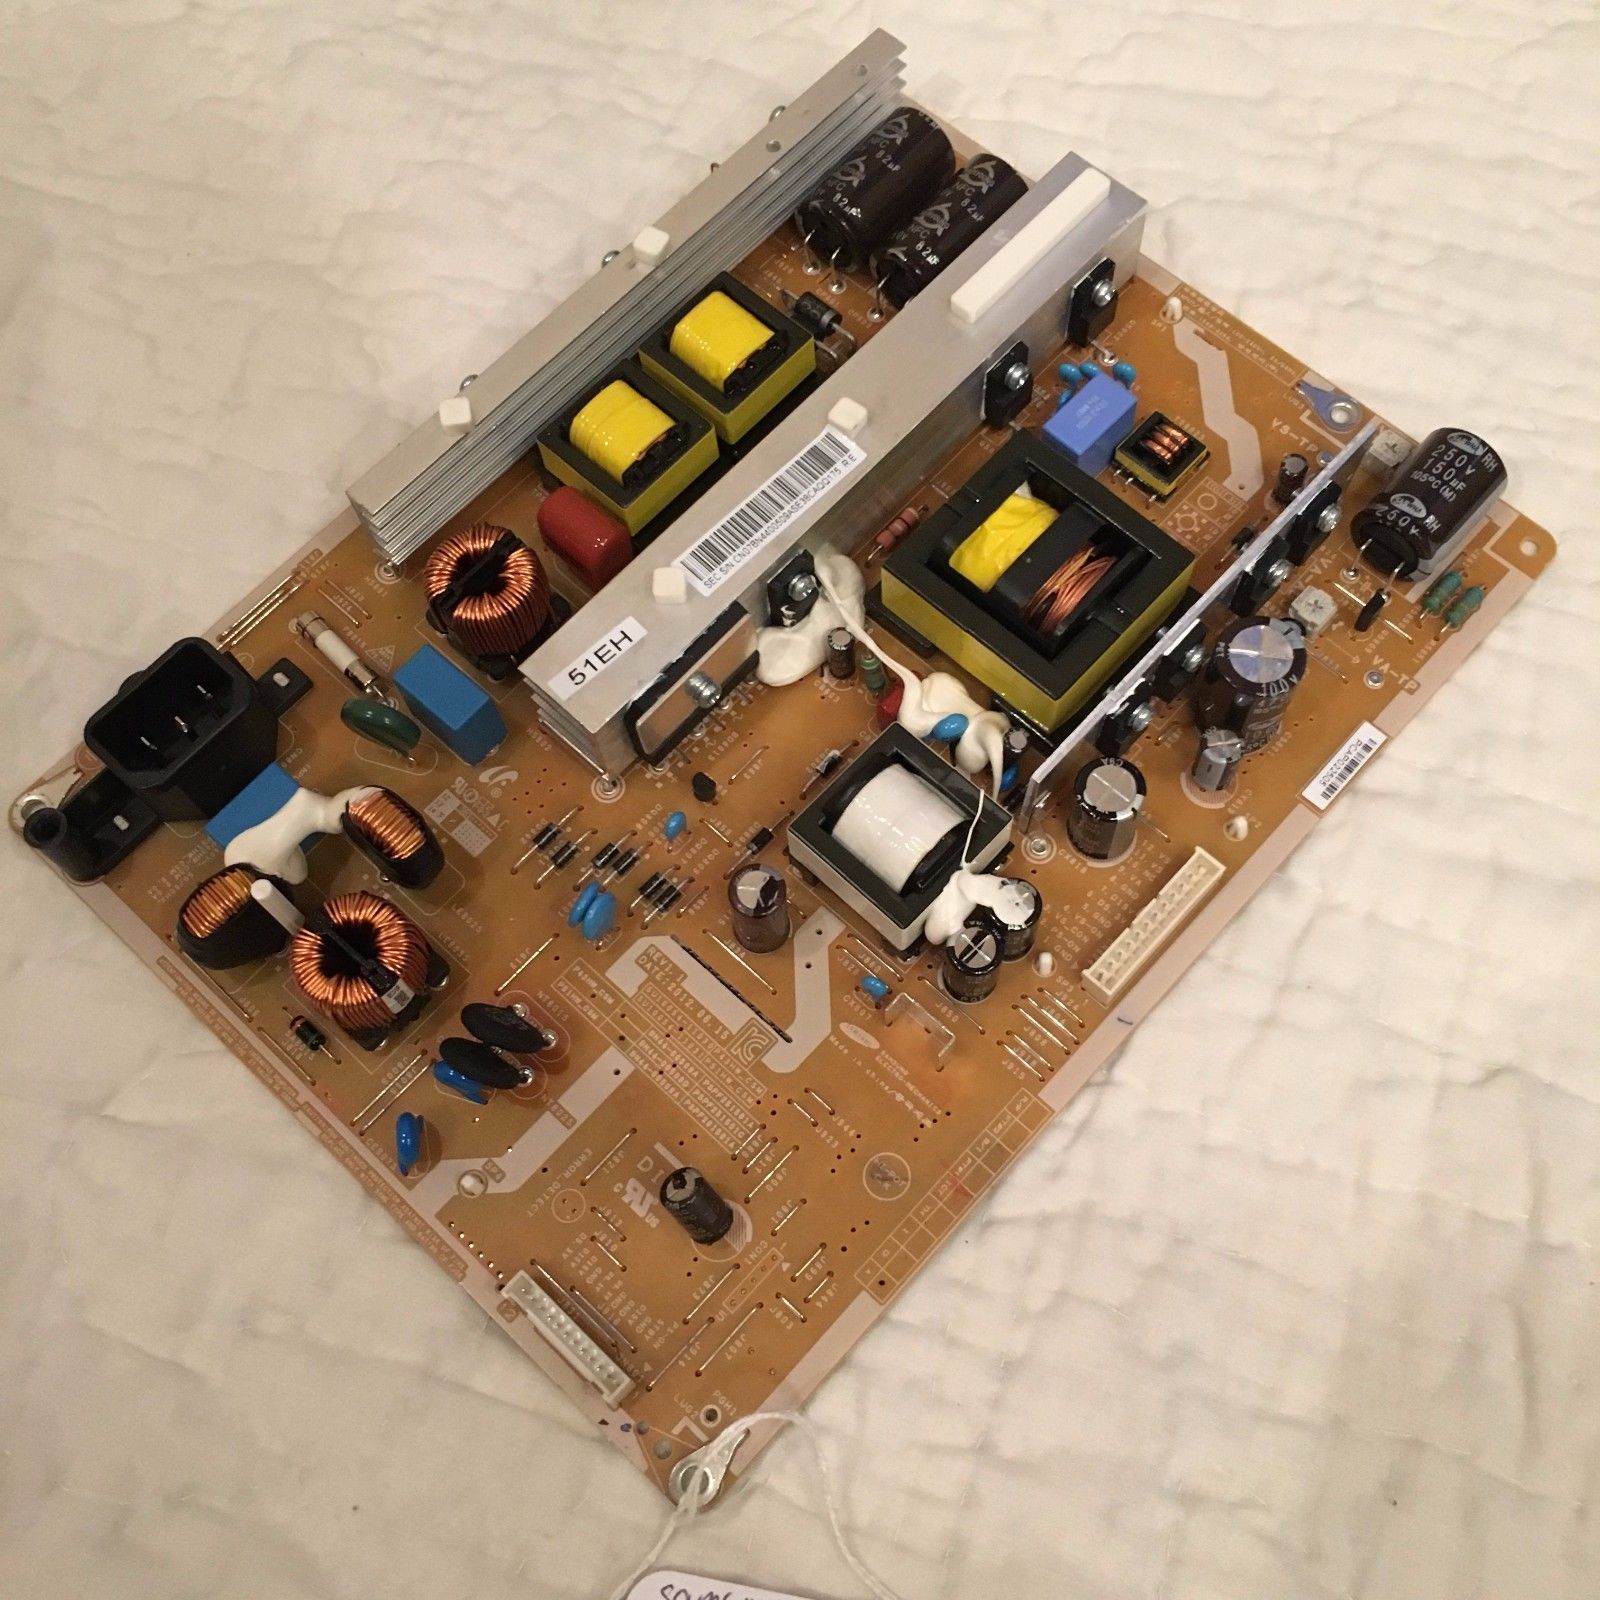 SAMSUNG BN44-00509A POWER SUPPLY BOARD FOR PN51E450 AND OTHER MO